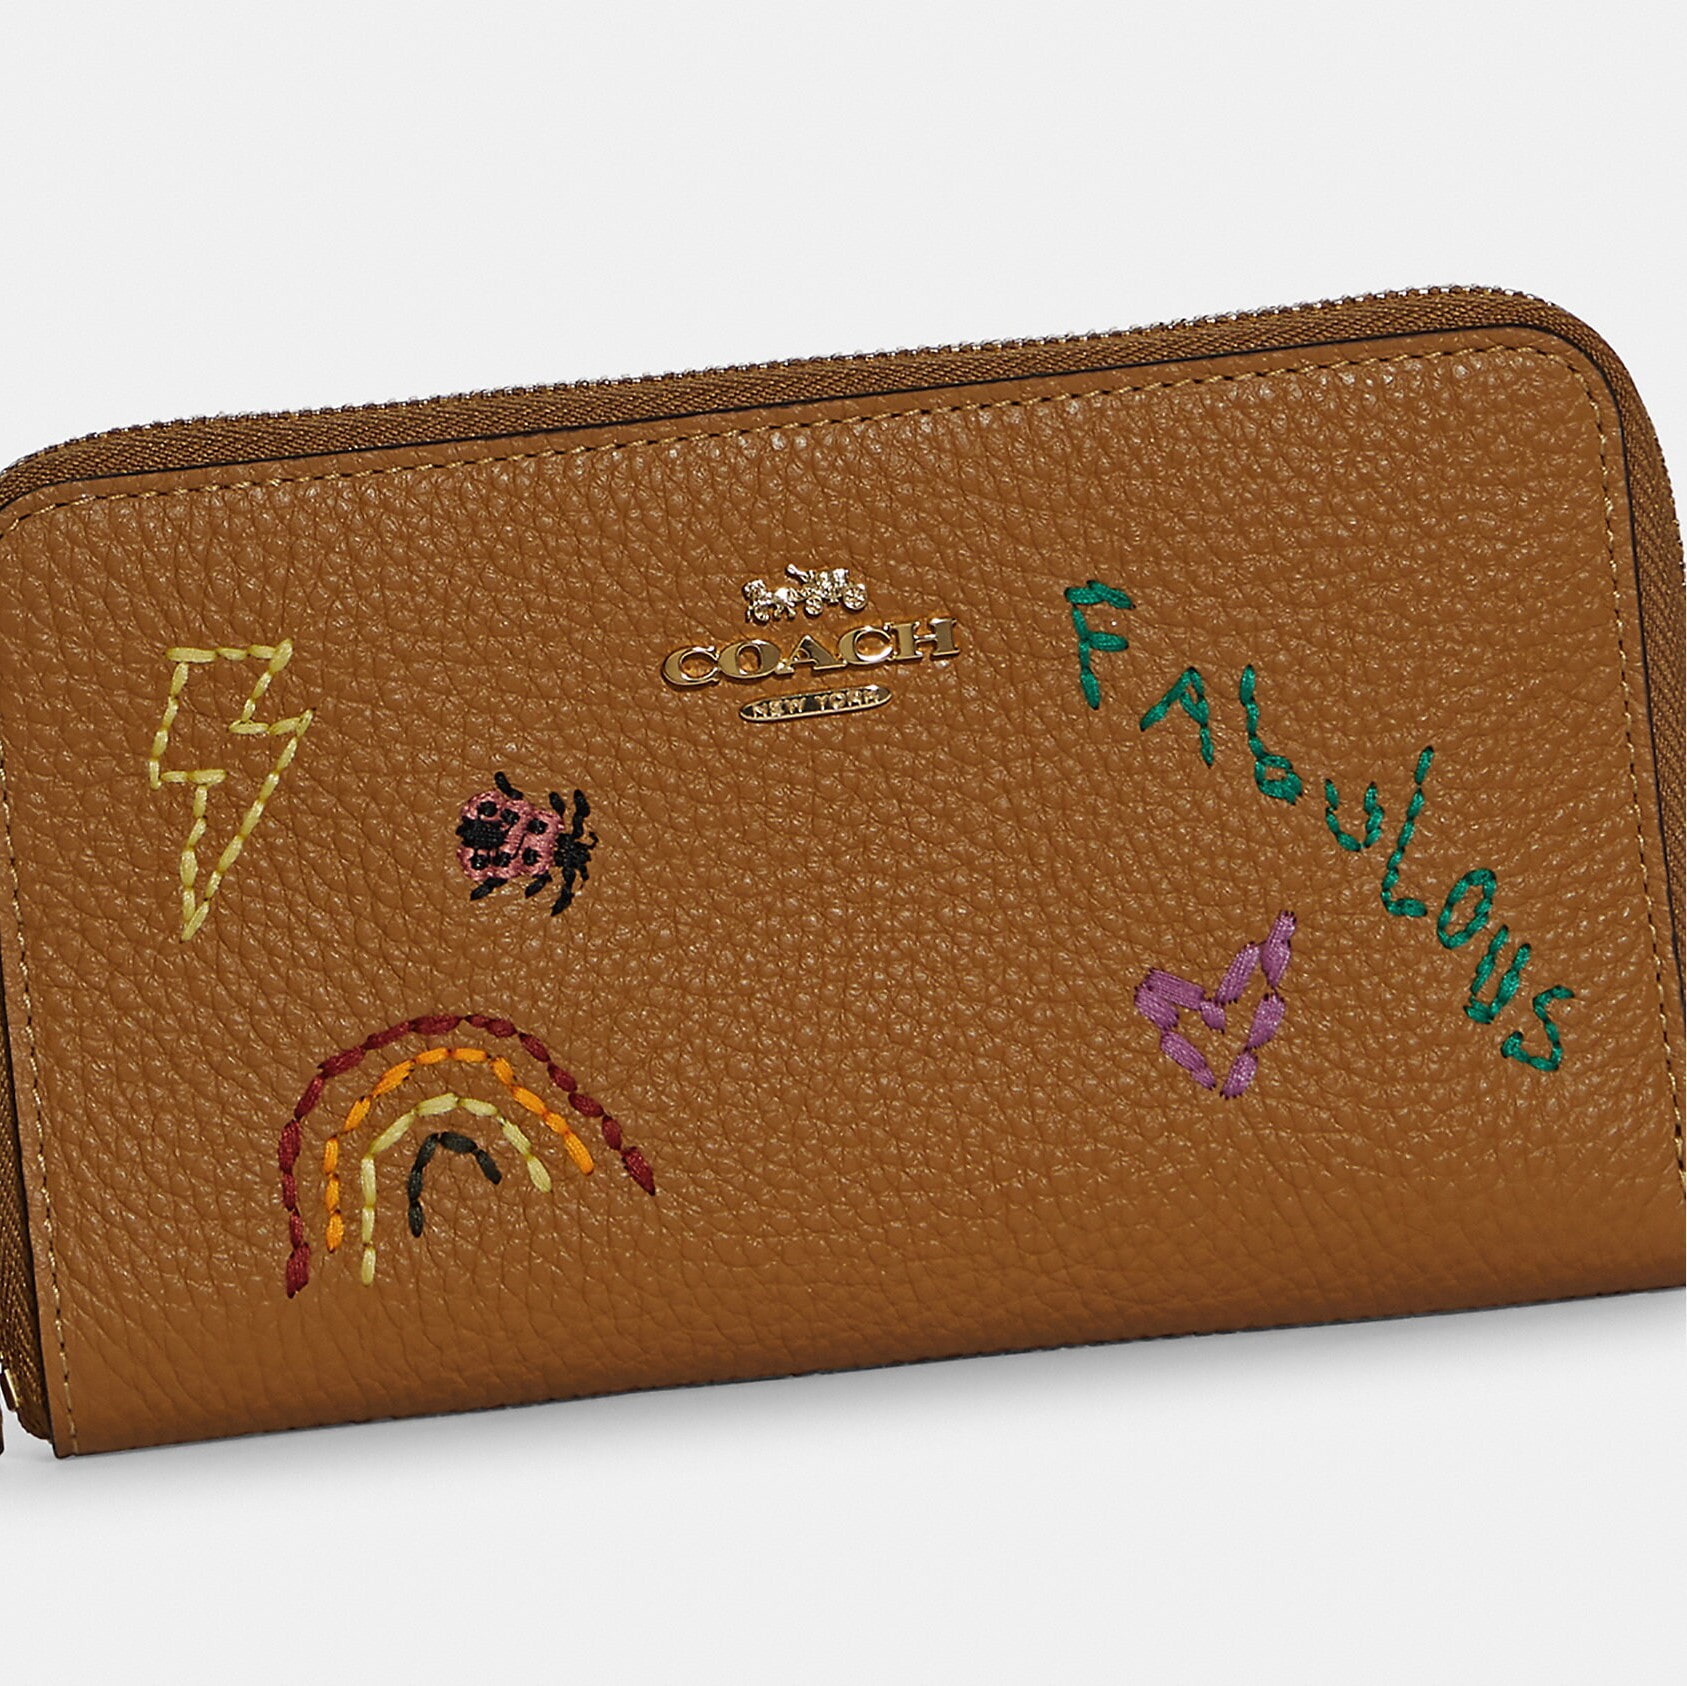 VÍ DÀI NỮ BROWN COACH MEDIUM ID ZIP WALLET WITH DIARY EMBROIDERY 3